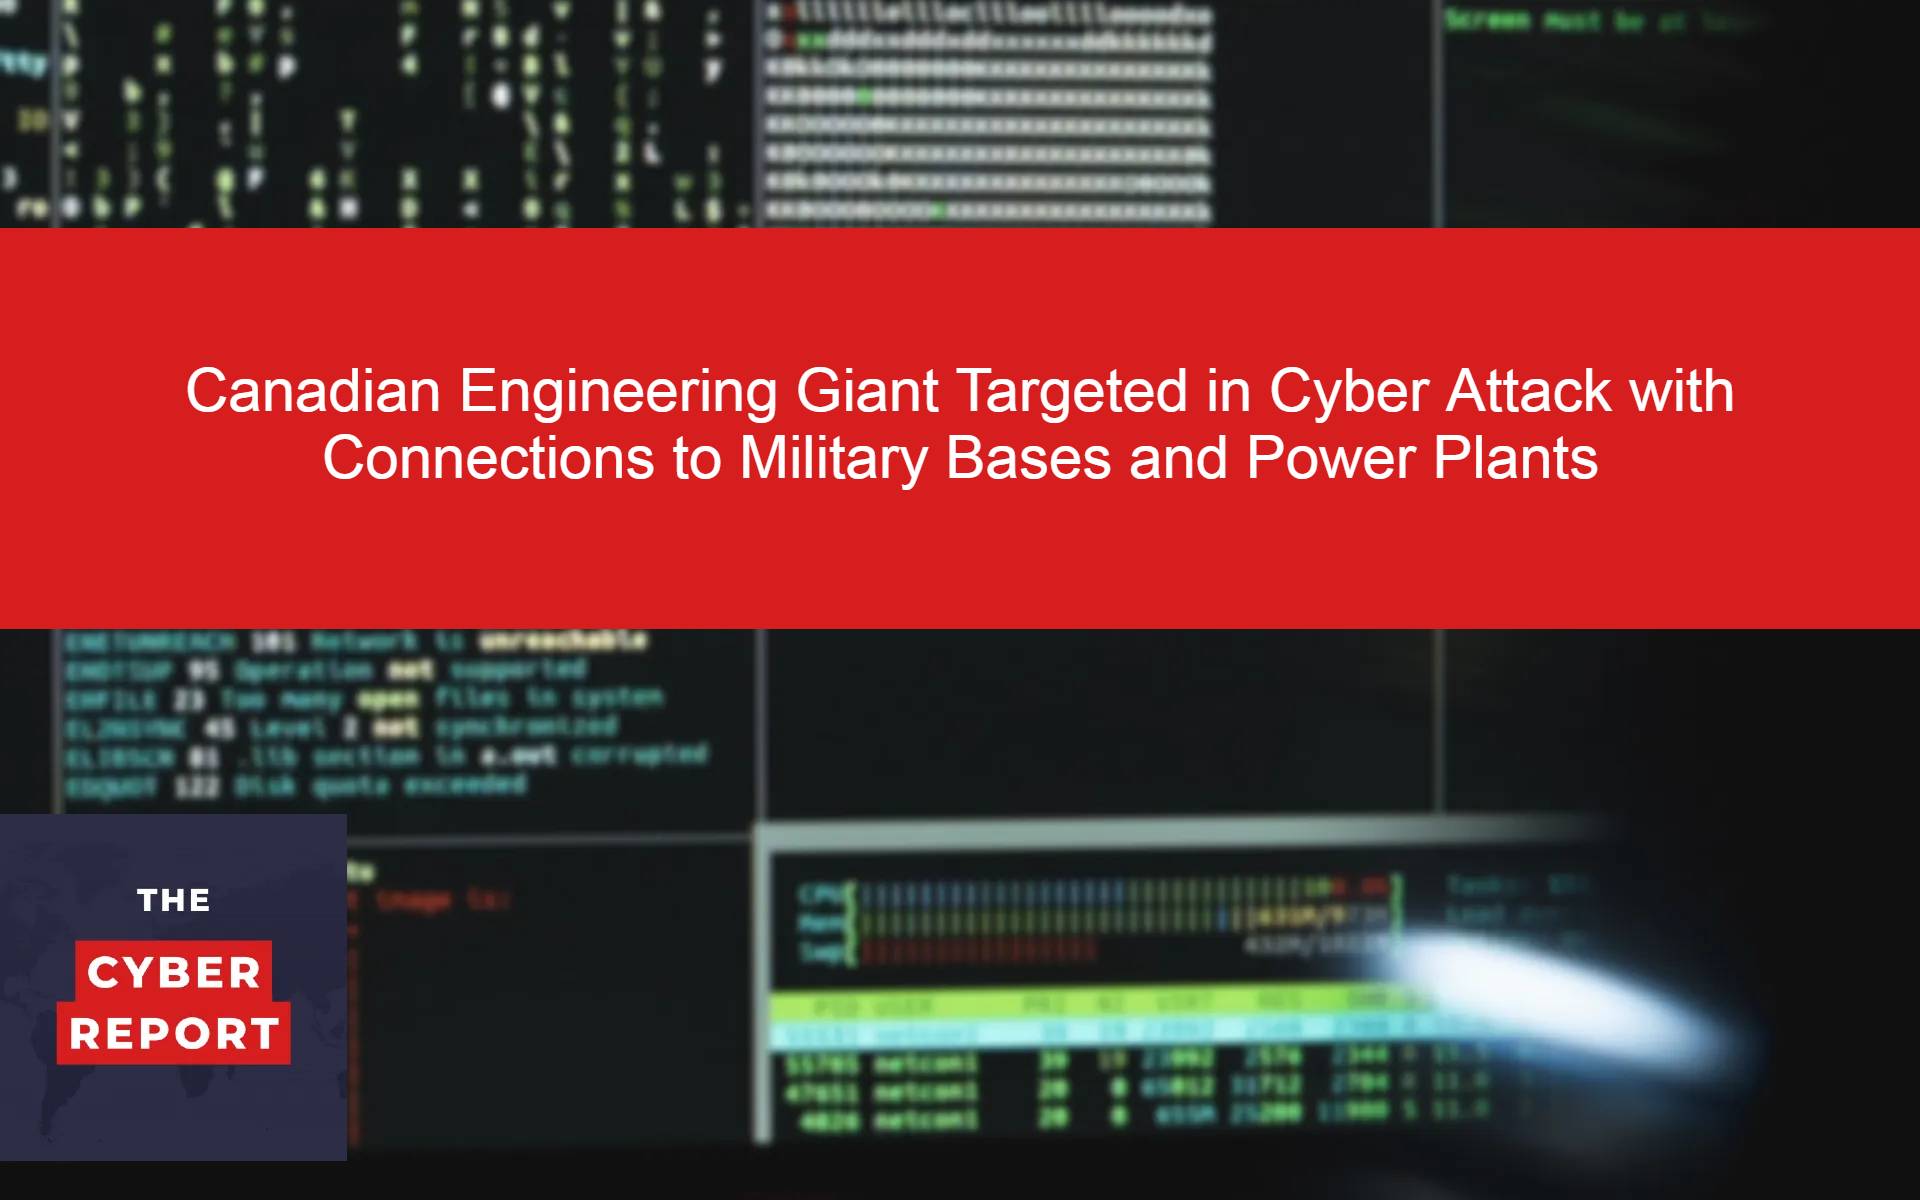 Canadian Engineering Giant Targeted in Cyber Attack with Connections to Military Bases and Power Plants